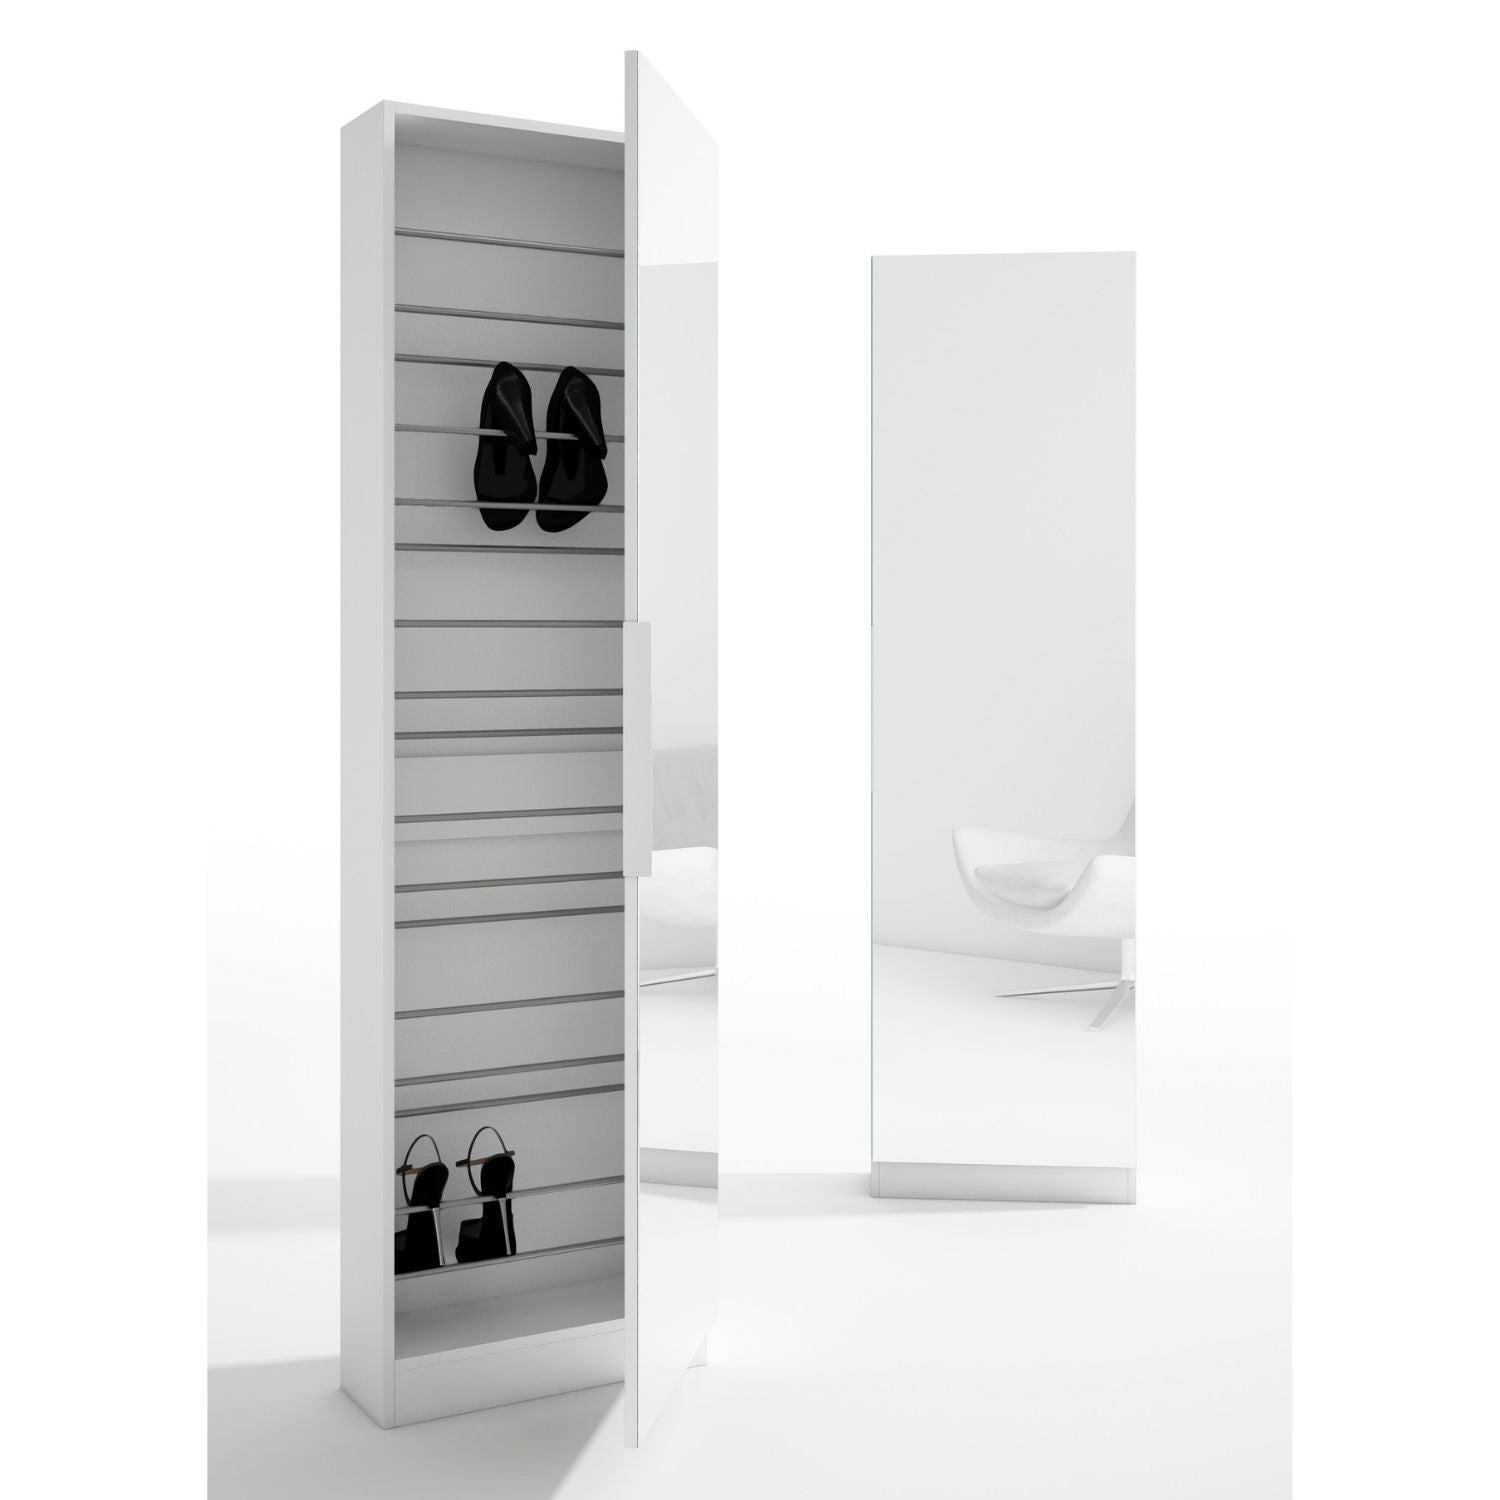 "Trend" shoe cabinet with mirror